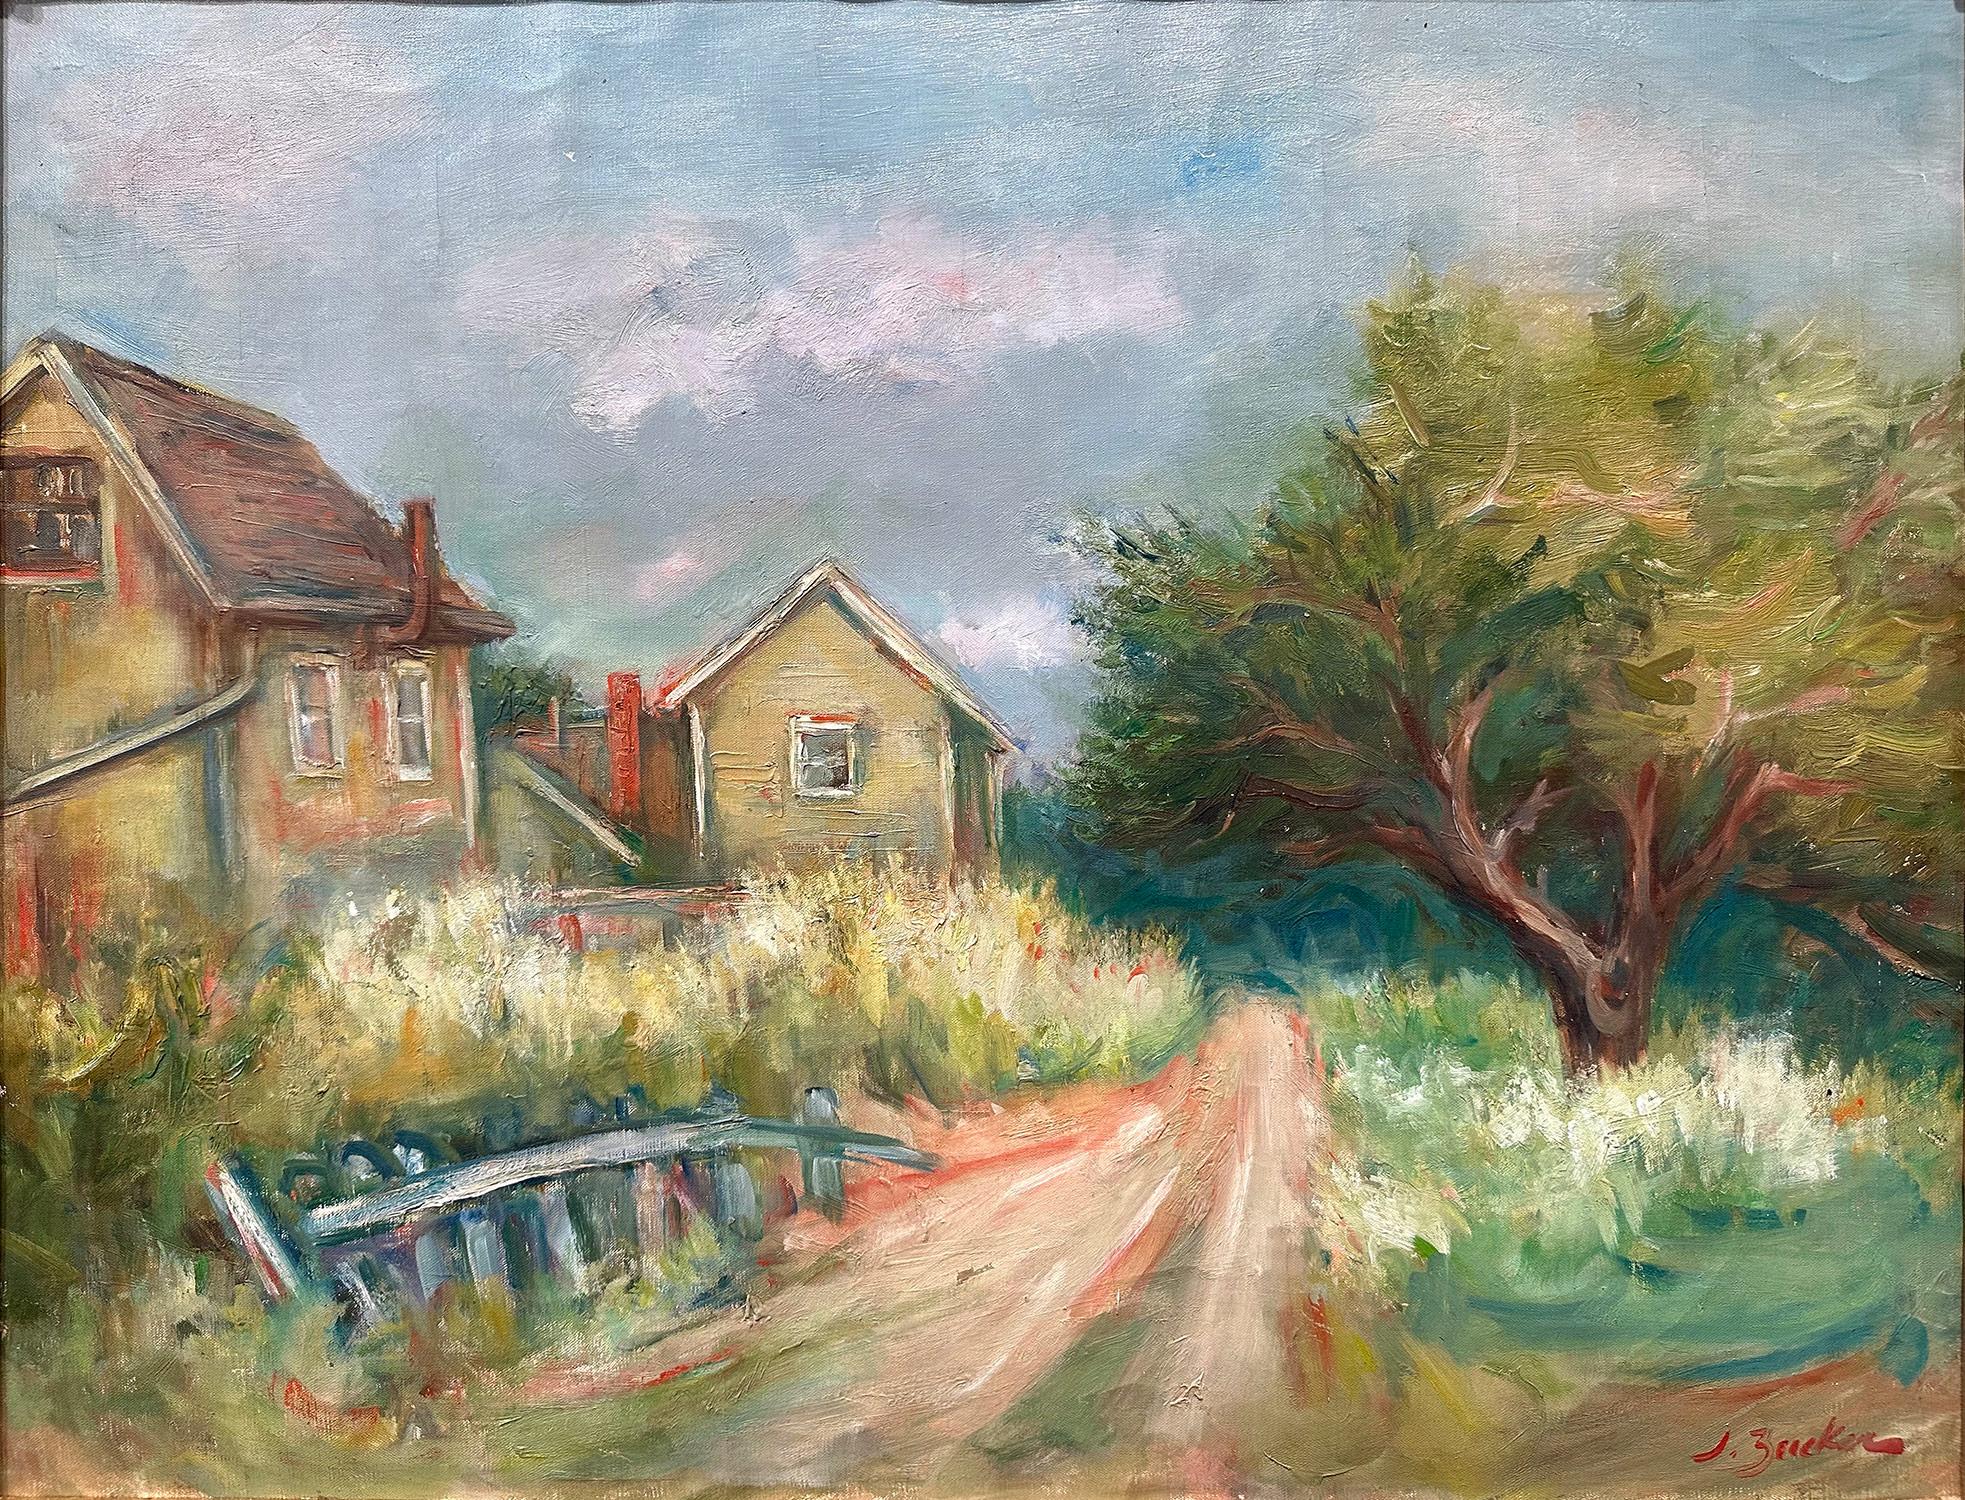 This painting depicts a whimsical landscape of a countryside pathway crossing through the town with the village houses on the left side with a wooden fence next to it, and across a lush tree that encompasses the composition. The bright colors and